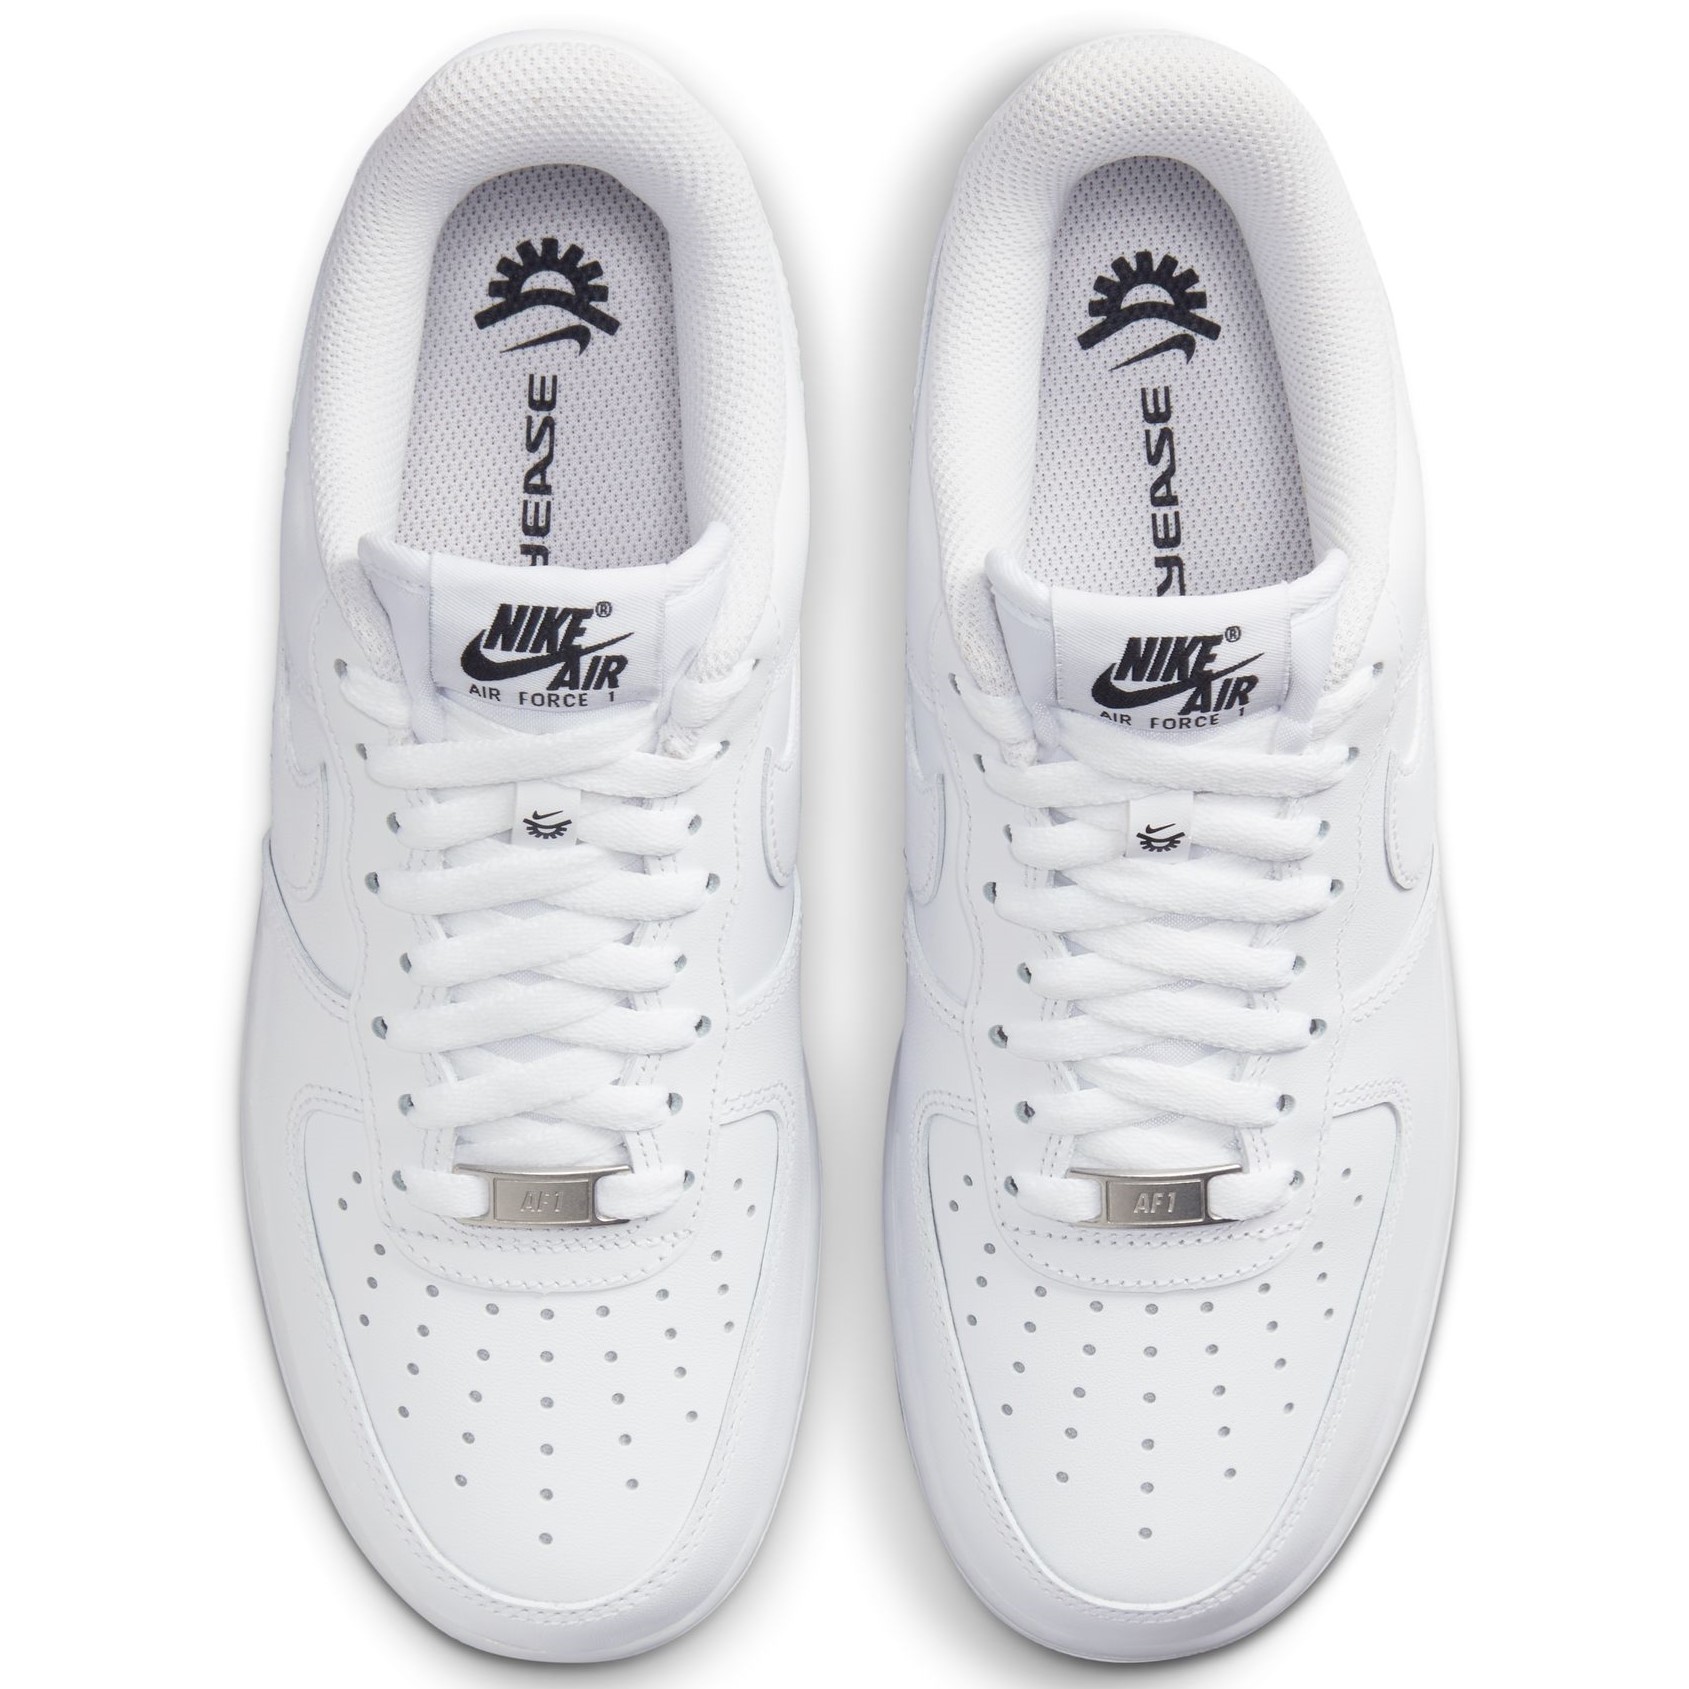 GIÀY THỂ THAO NỮ NIKE AIR FORCE 1 07 EASYON WHITE WOMENS SHOES DX5883-100 6